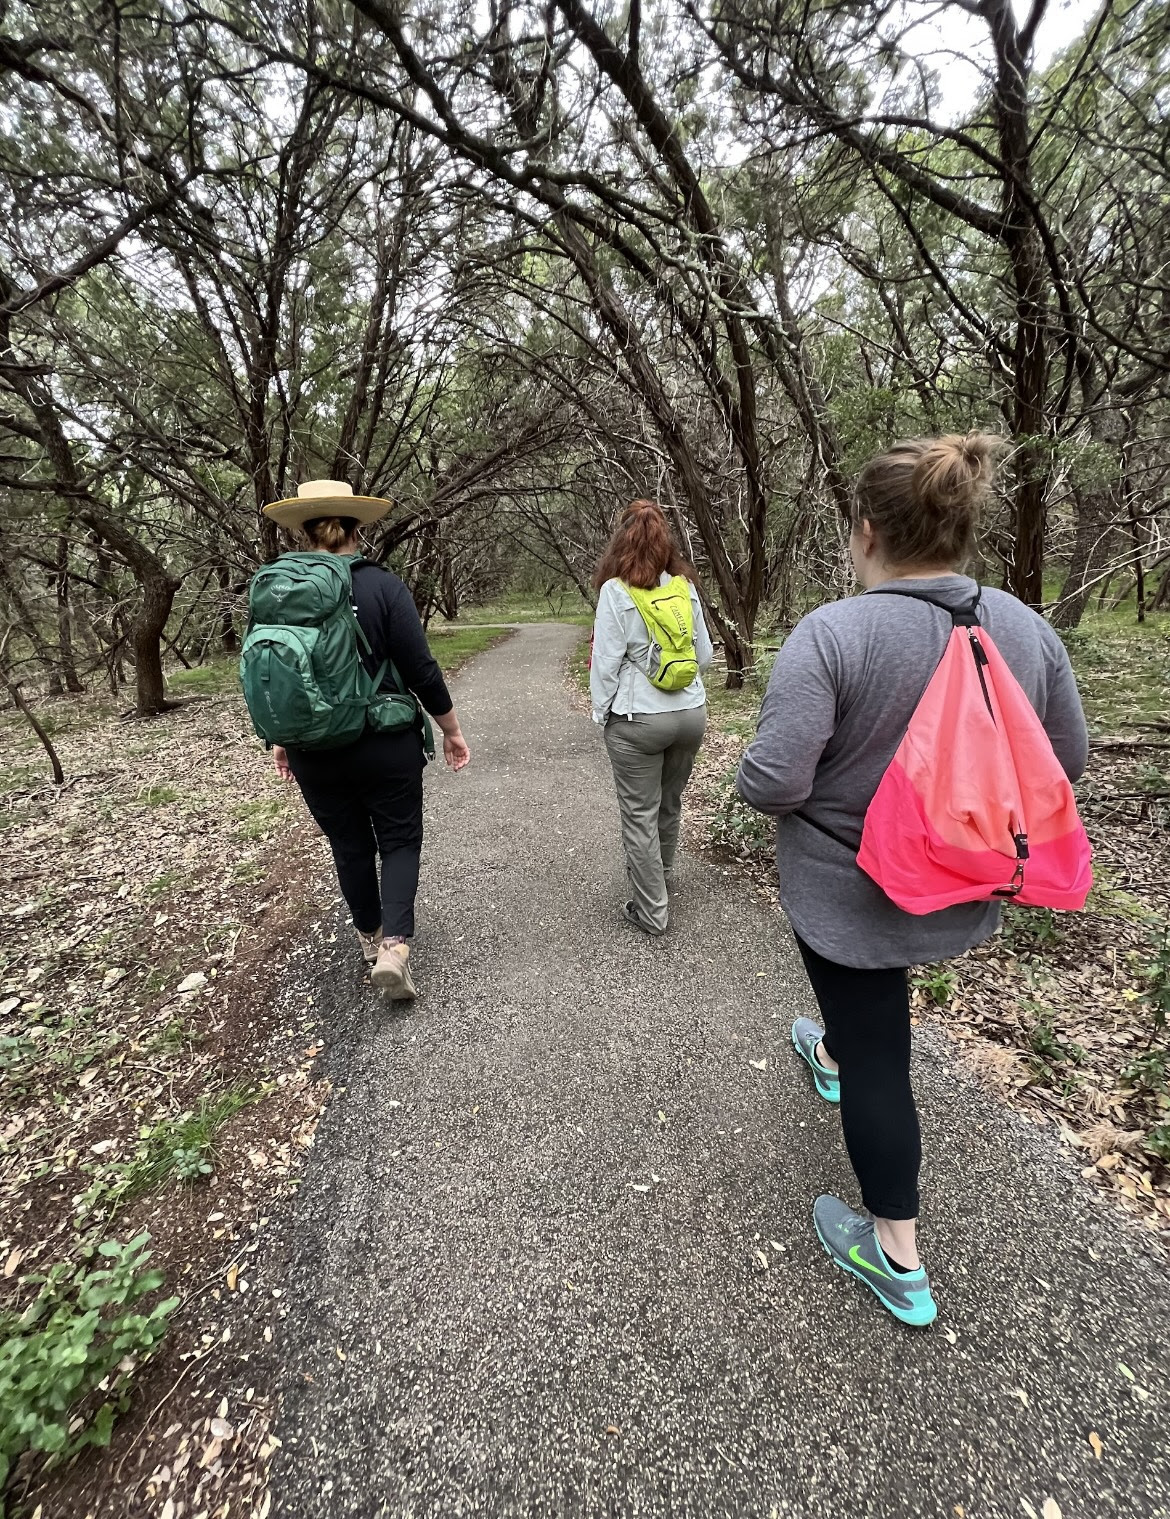 Pictured: Three women walking alongside a nature trail surrounded by trees in the fall. Picture credits to Sierra Club Military Outdoors 